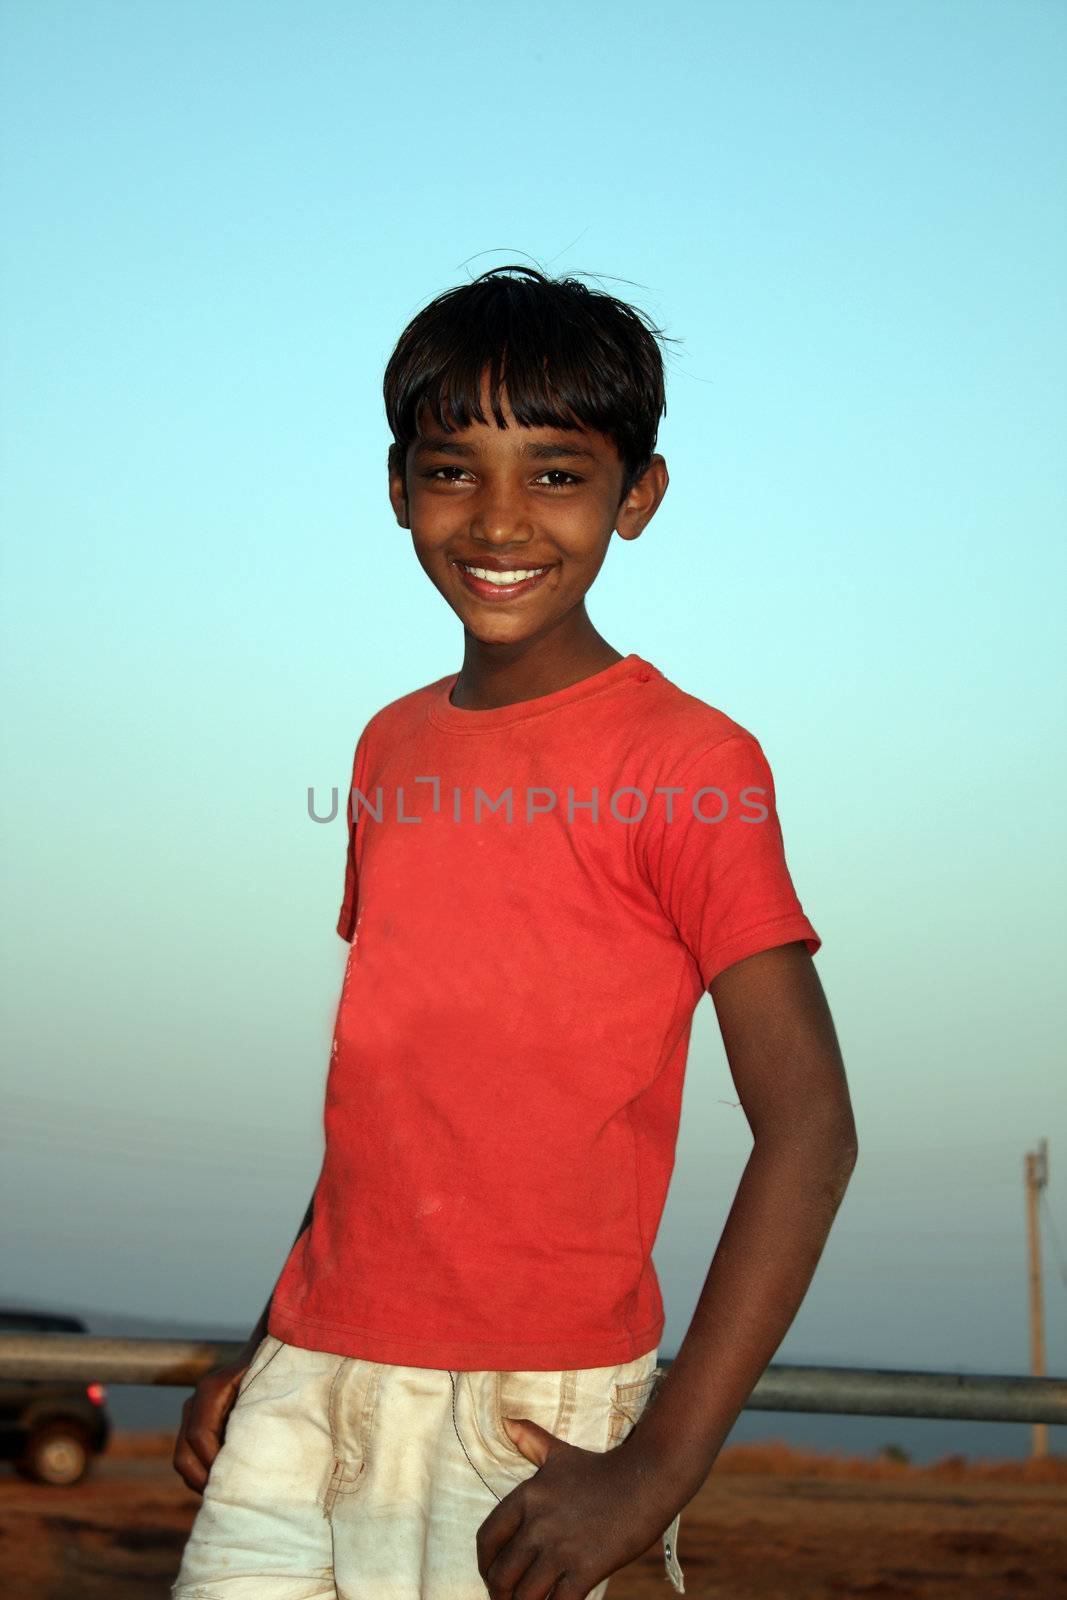 A little Indian teenage boy from rural and poor parts of India.